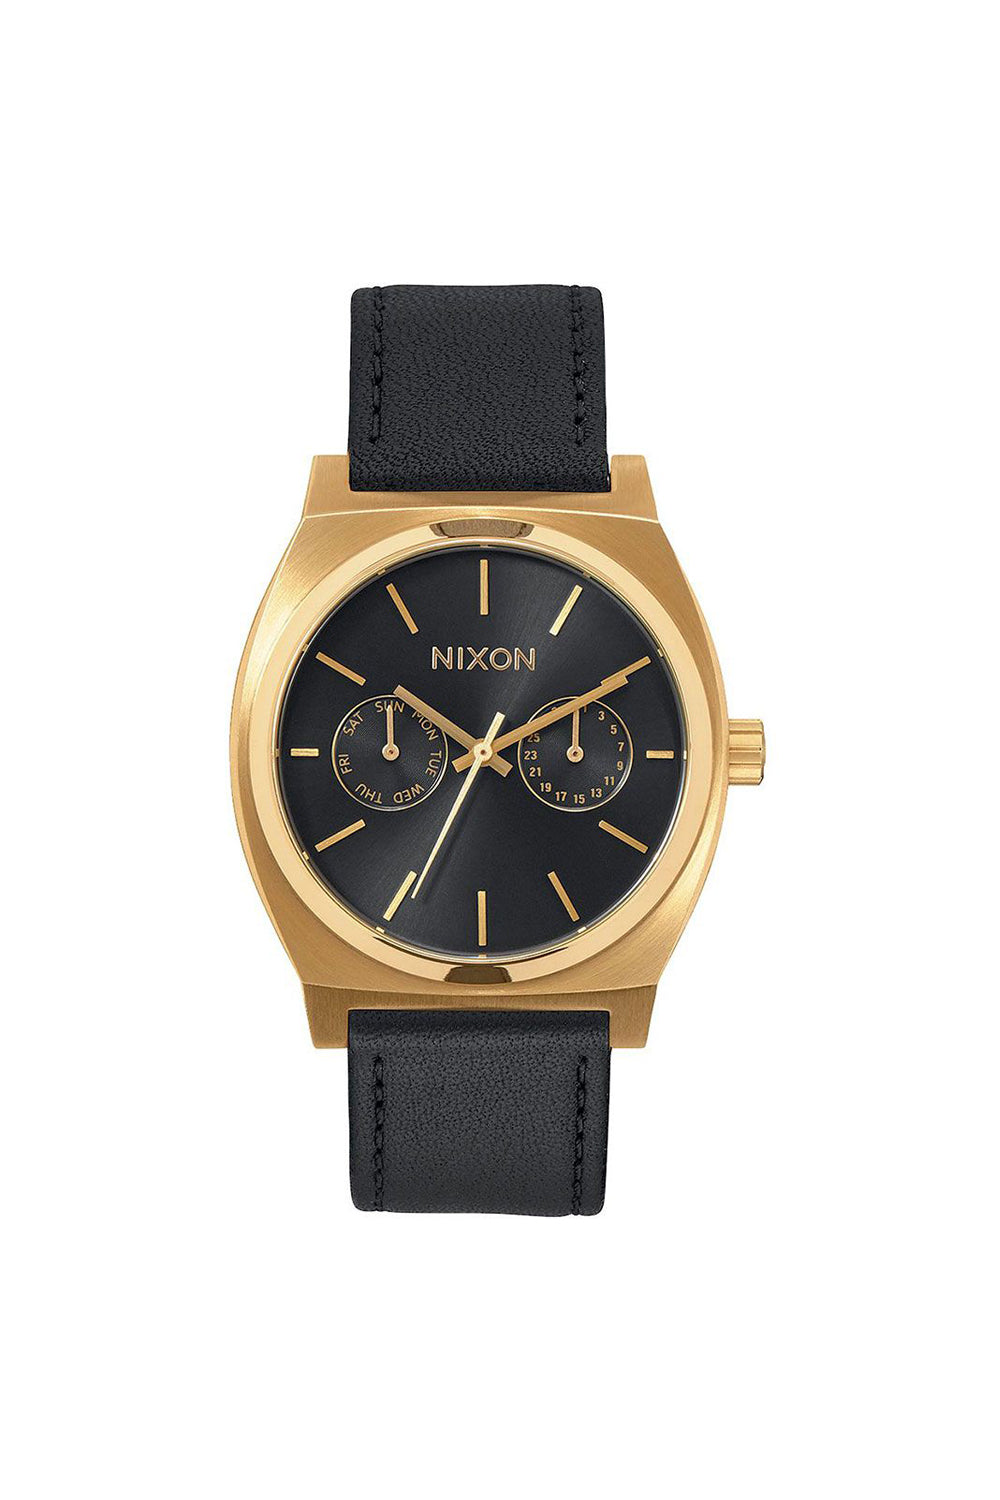 Nixon Time Teller Deluxe Leather